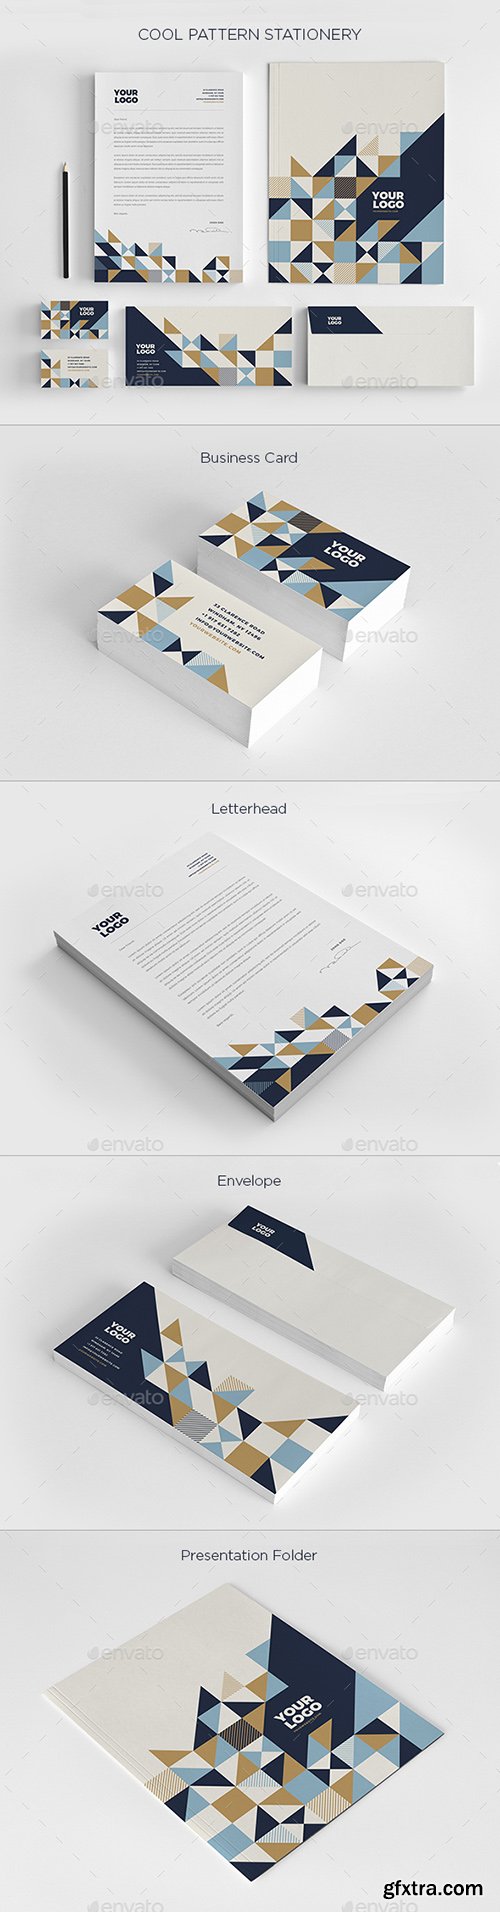 Graphicriver Cool Pattern Stationery 19204080